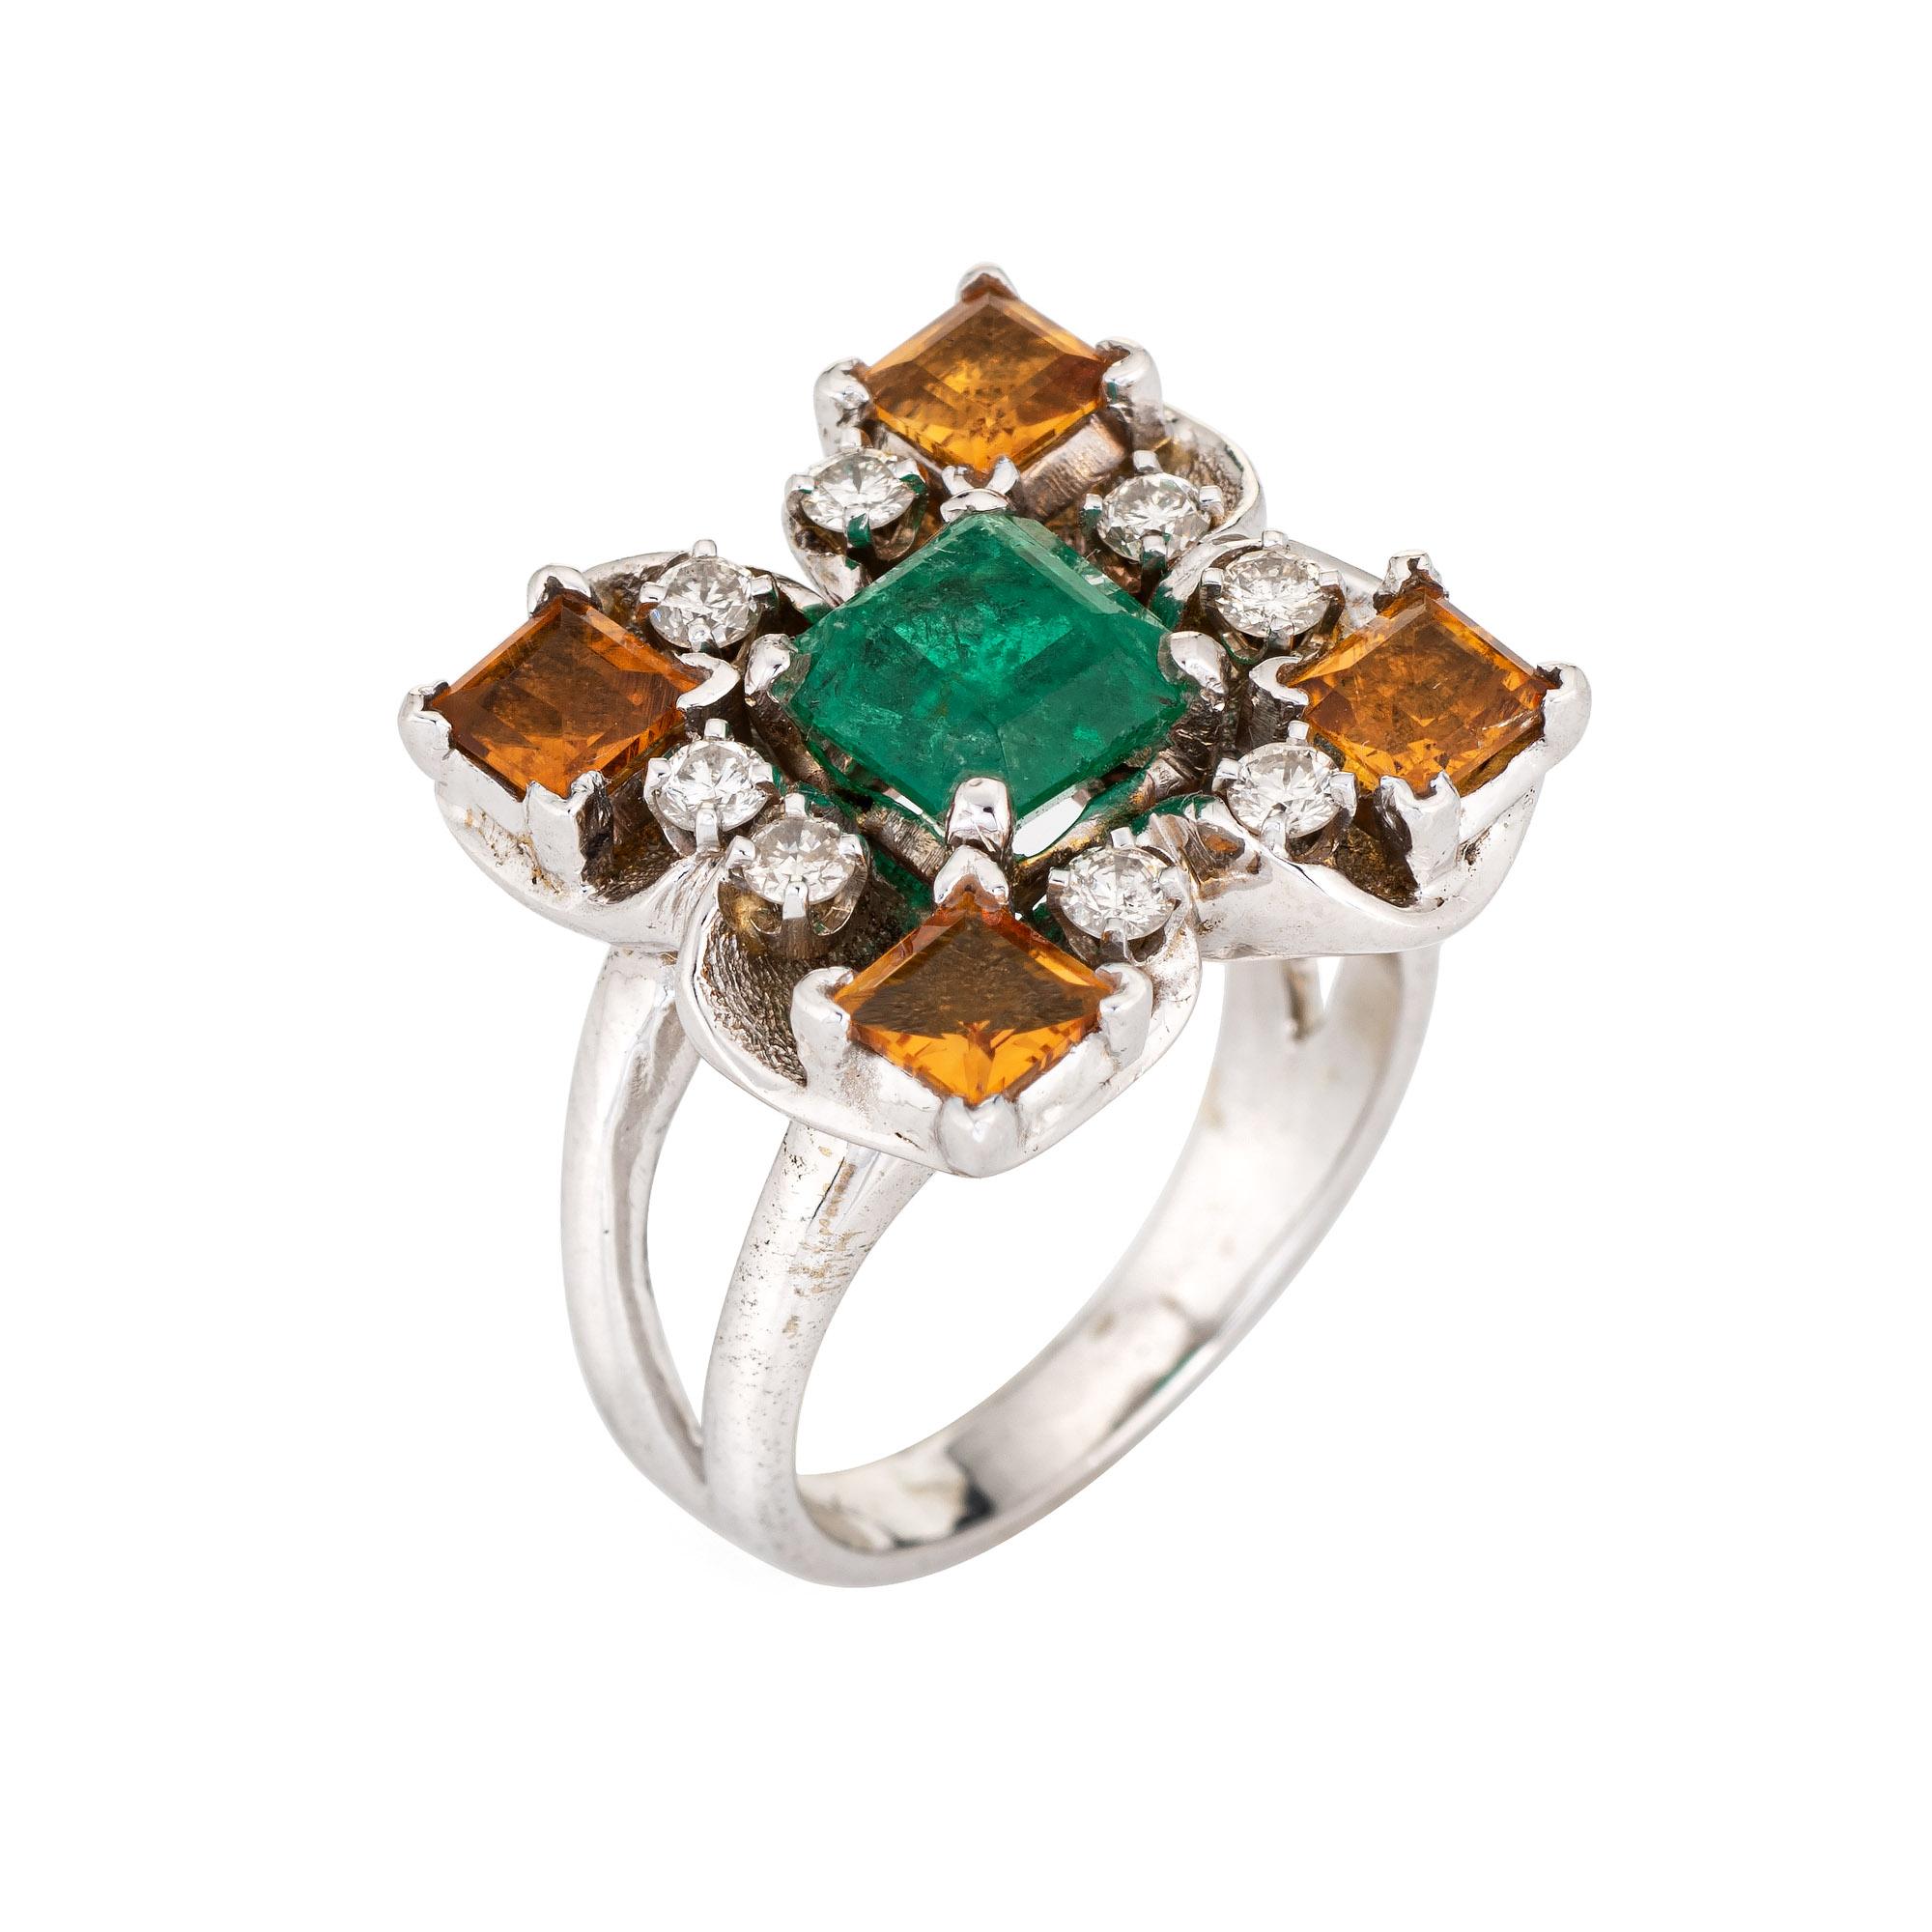 Finely detailed vintage emerald, citrine & diamond square cocktail ring (circa 1960s to 1970s), crafted in 14 karat white gold.

Emerald measures 7mm; four citrines measure 4.5mm each and eight diamonds total an estimated 0.16 carats (estimated at